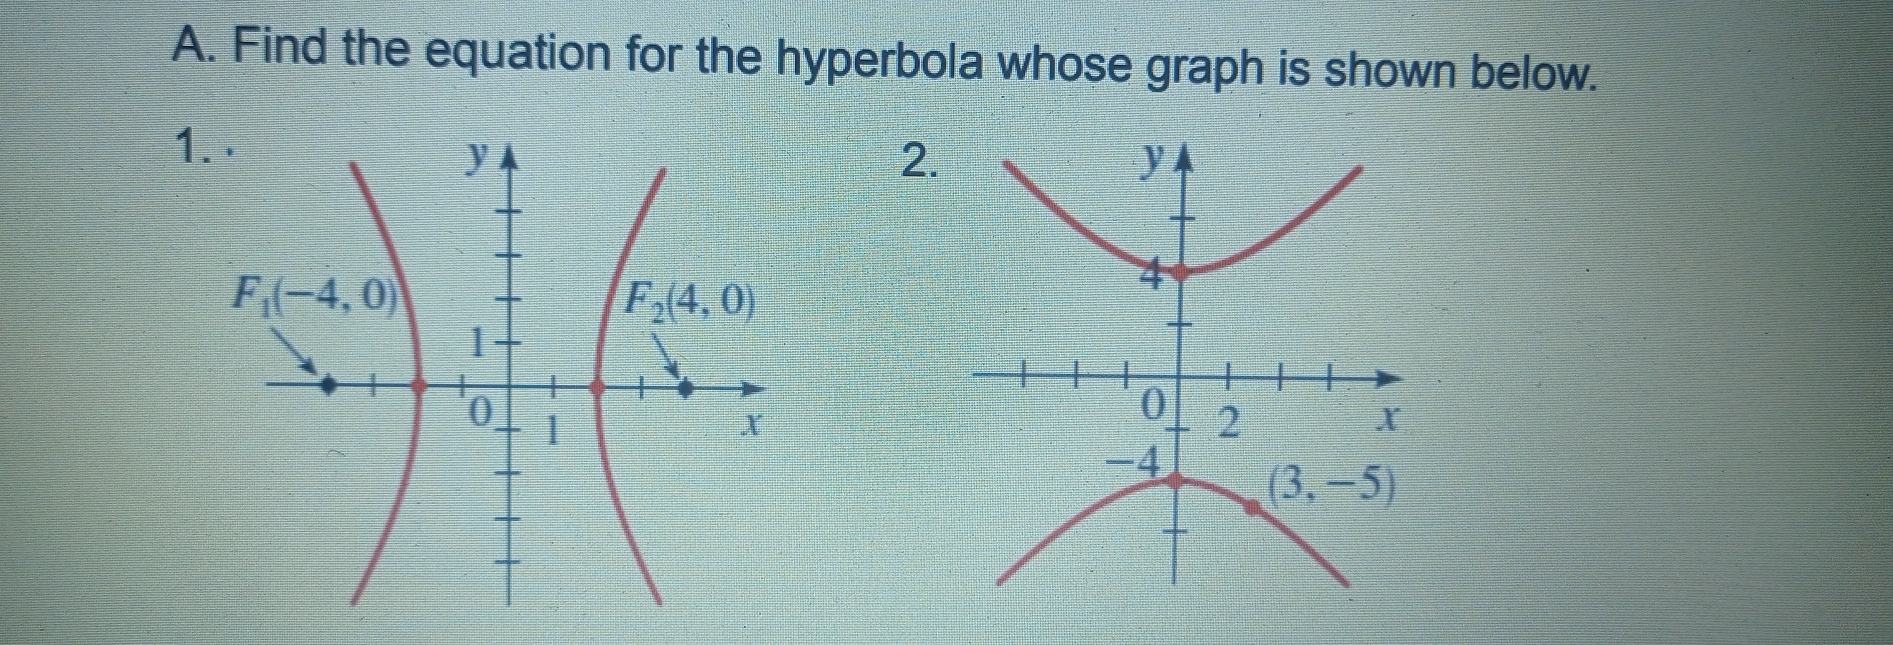 A. Find the equation for the hyperbola whose graph is shown below. 1 2.